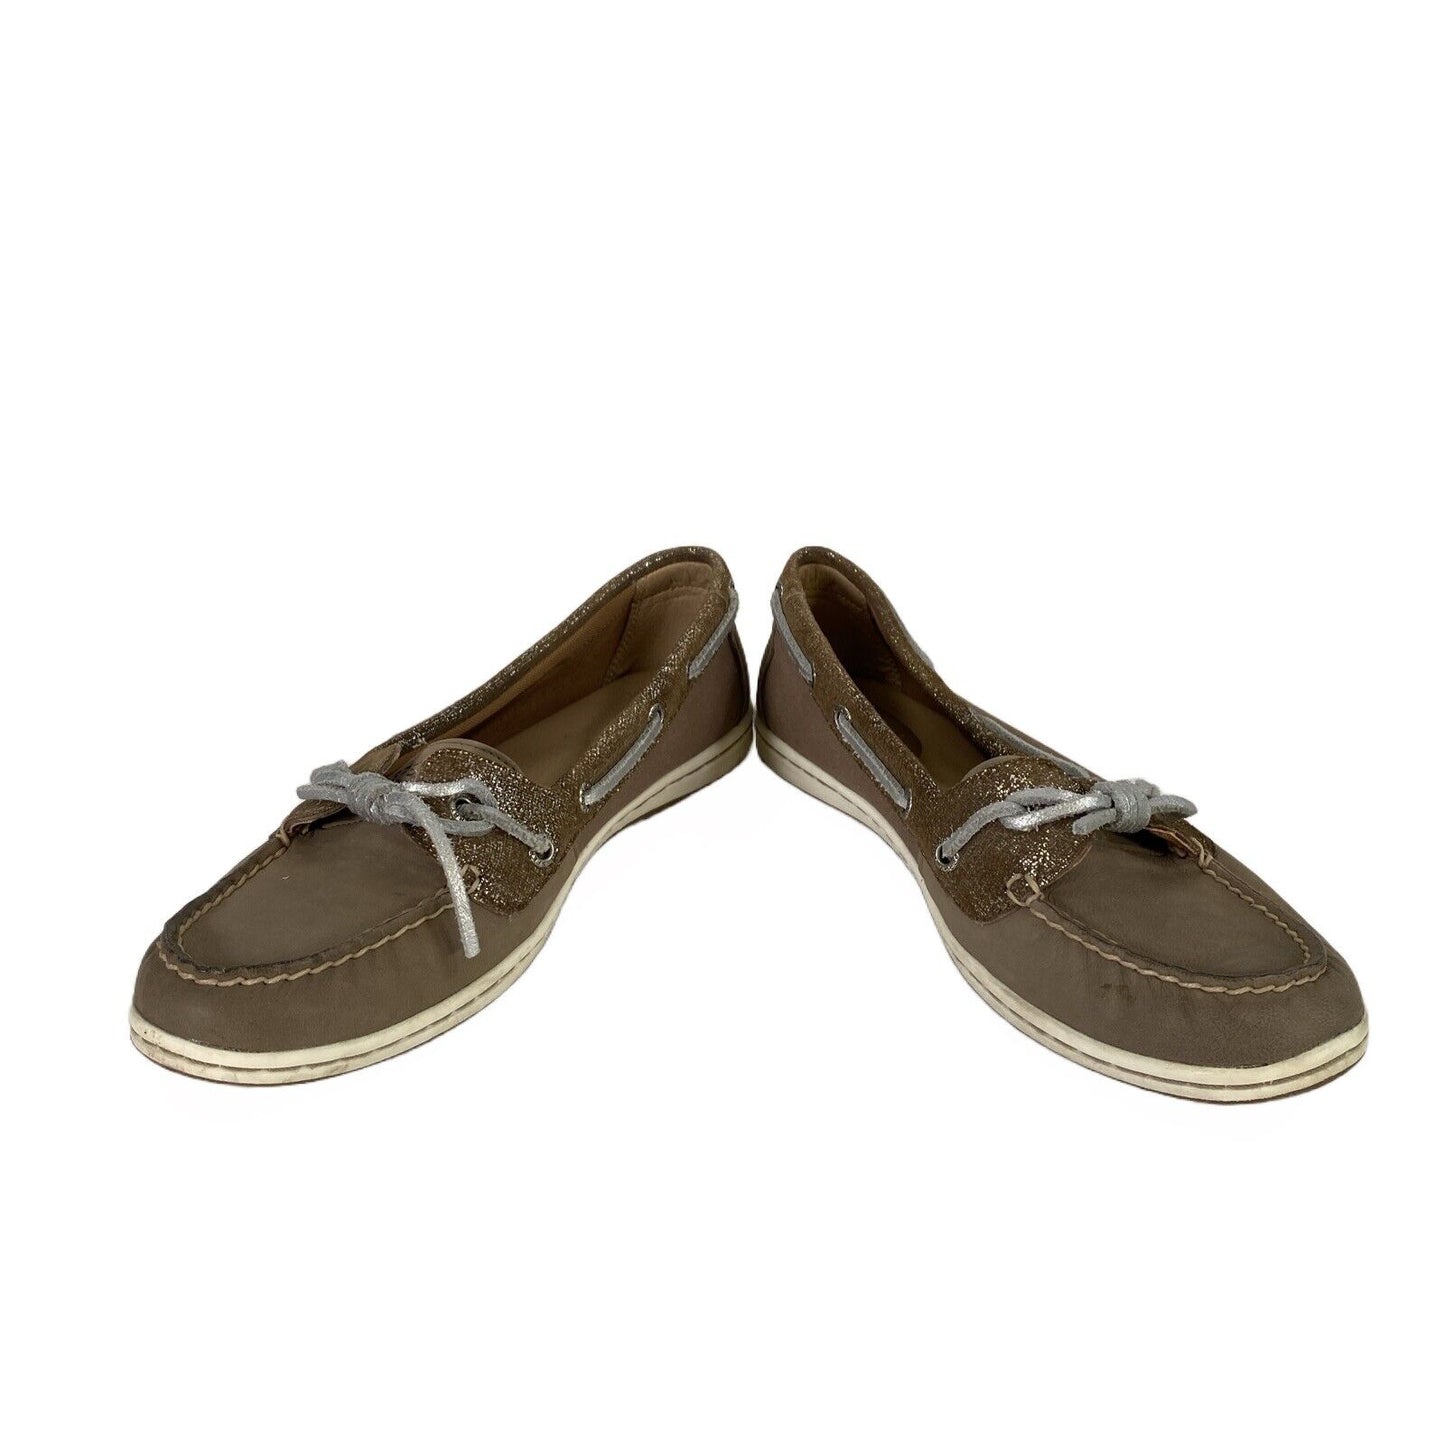 Sperry Women's Brown Metallic Leather Angelfish Boat Shoes - 8.5